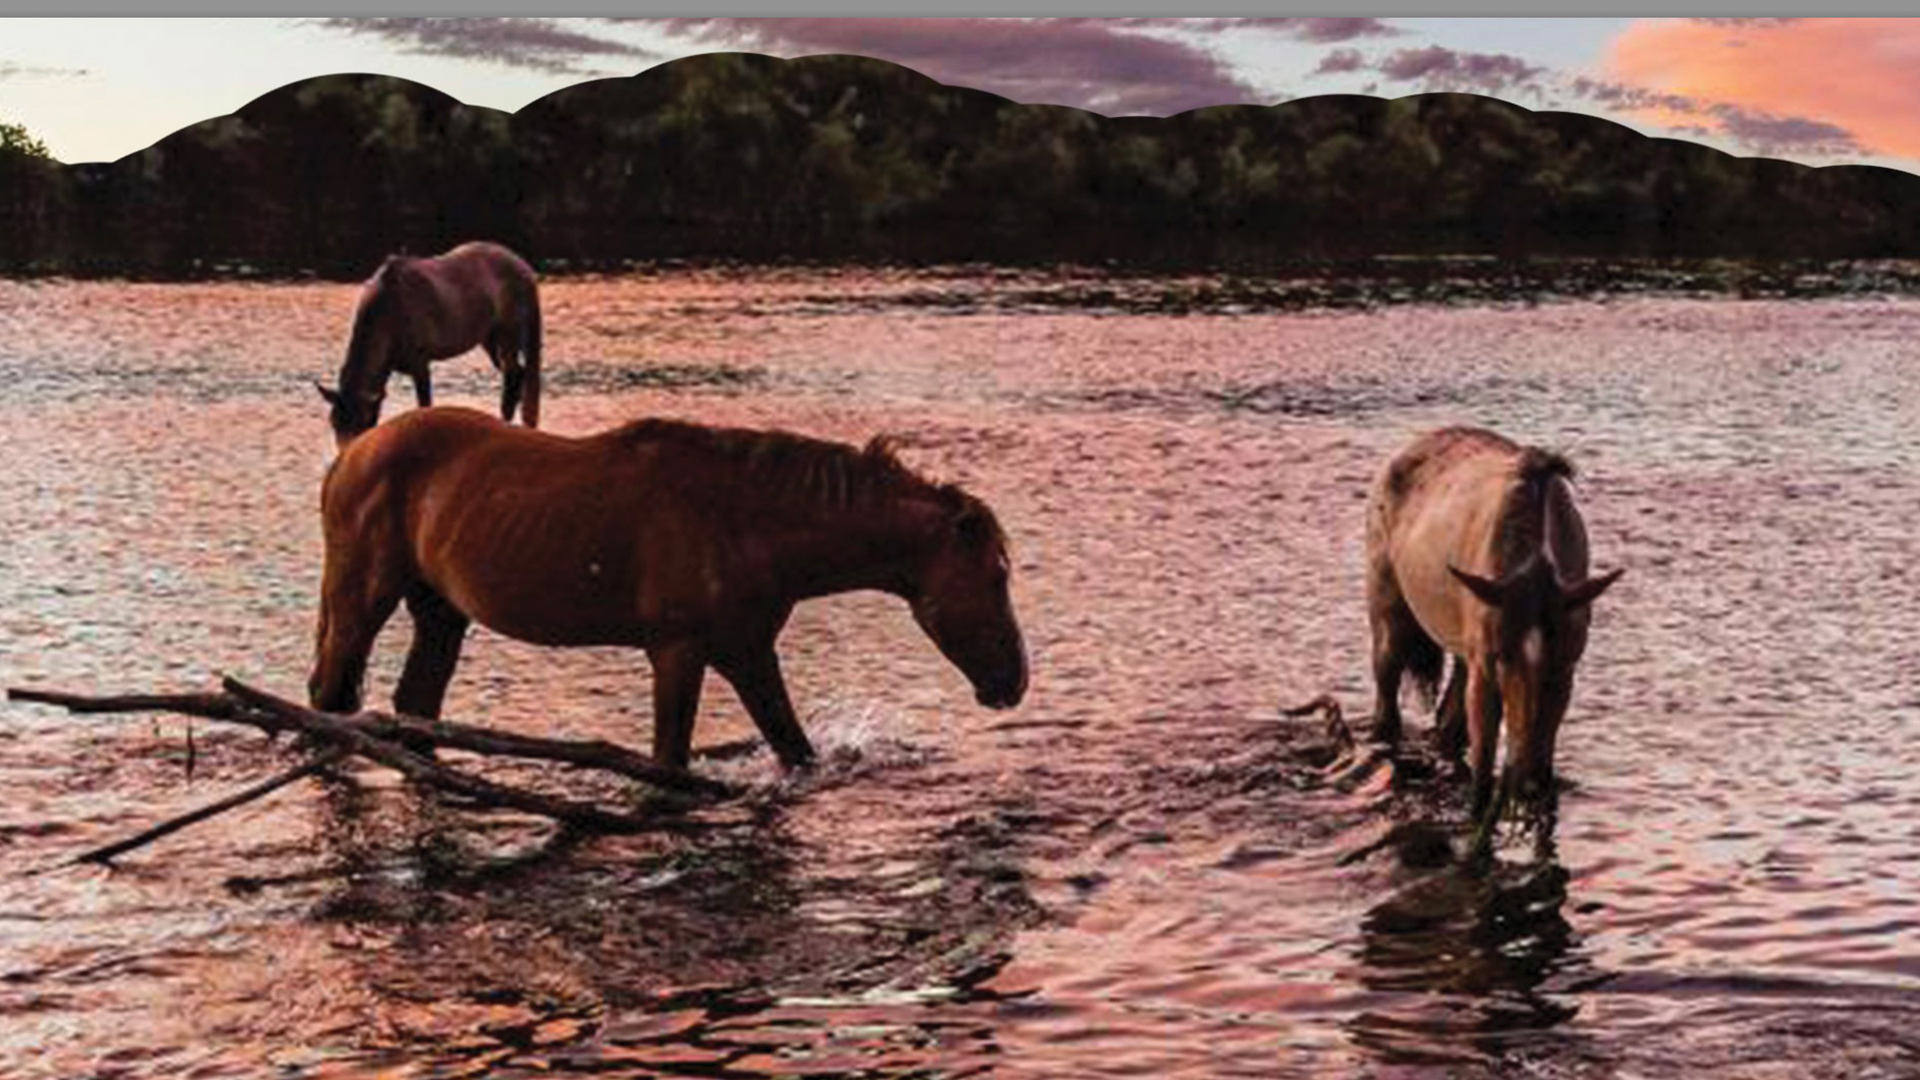 Wild horses swim offshore at a little-known beach, just minutes away from the popular center of a city.